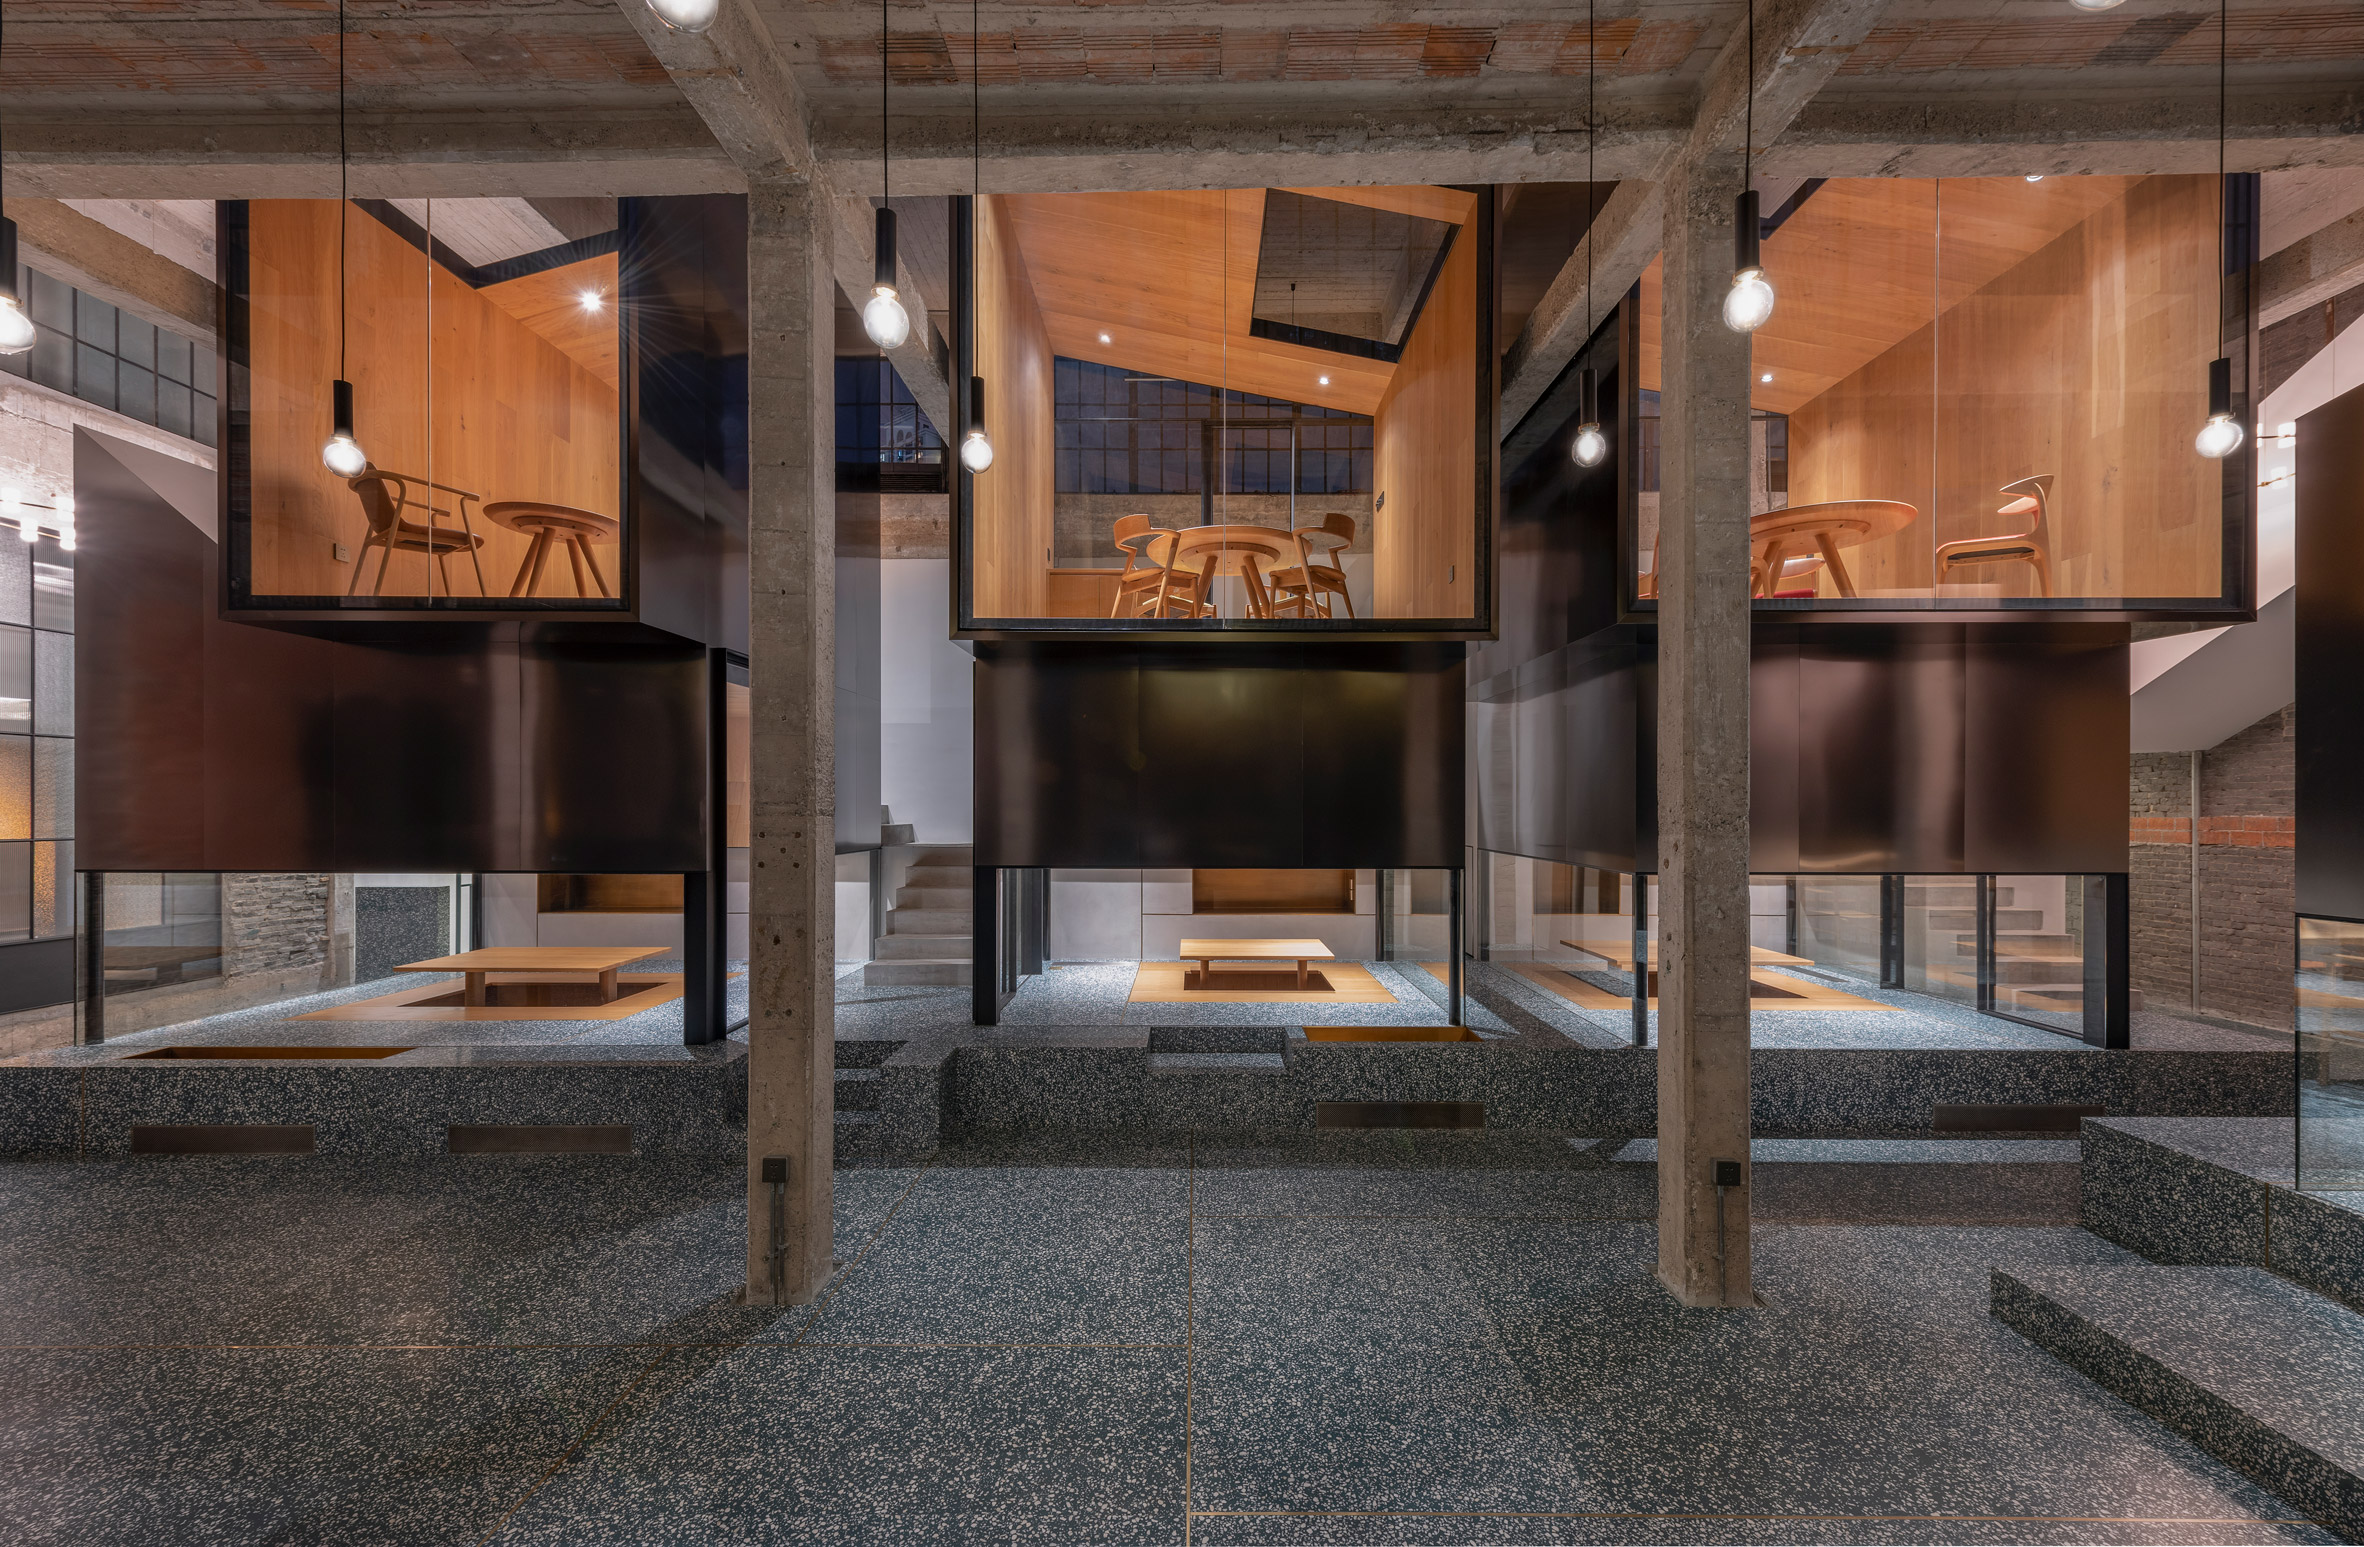 Linehouse adds elevated tearooms in a warehouse for Tingtai Teahouse in Shanghai